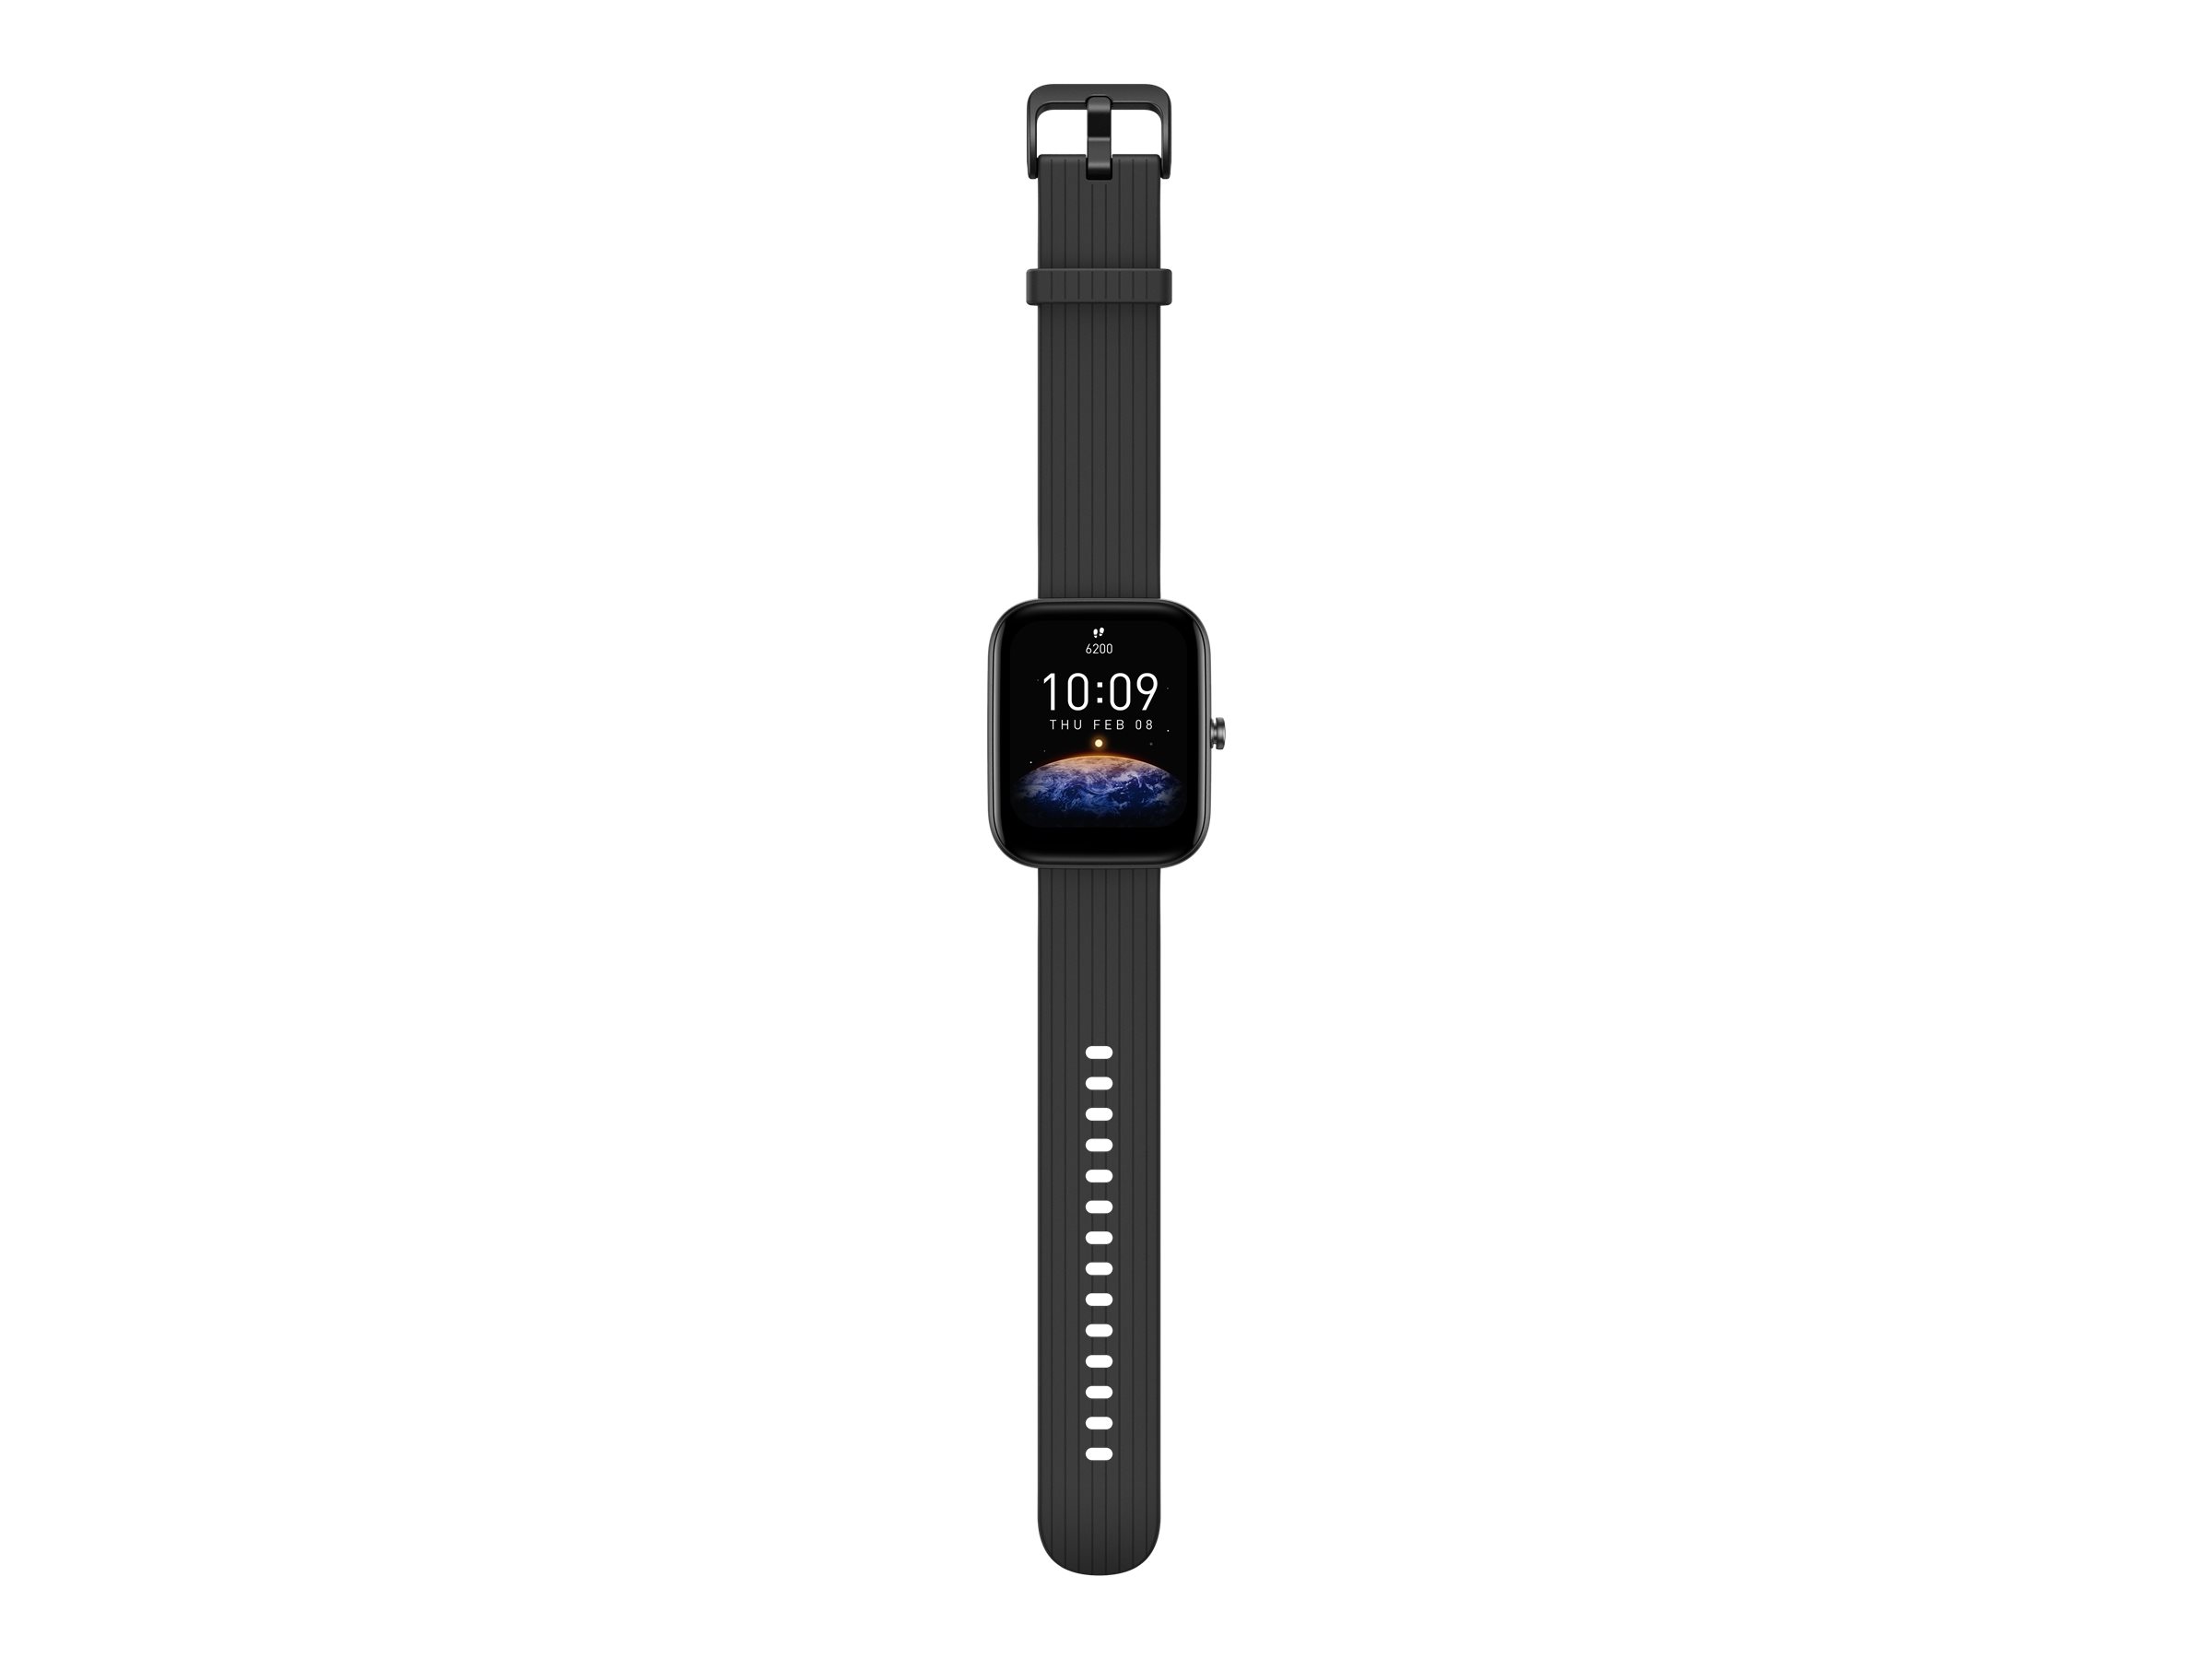 Amazfit Bip 3 Pro - full specs, details and review